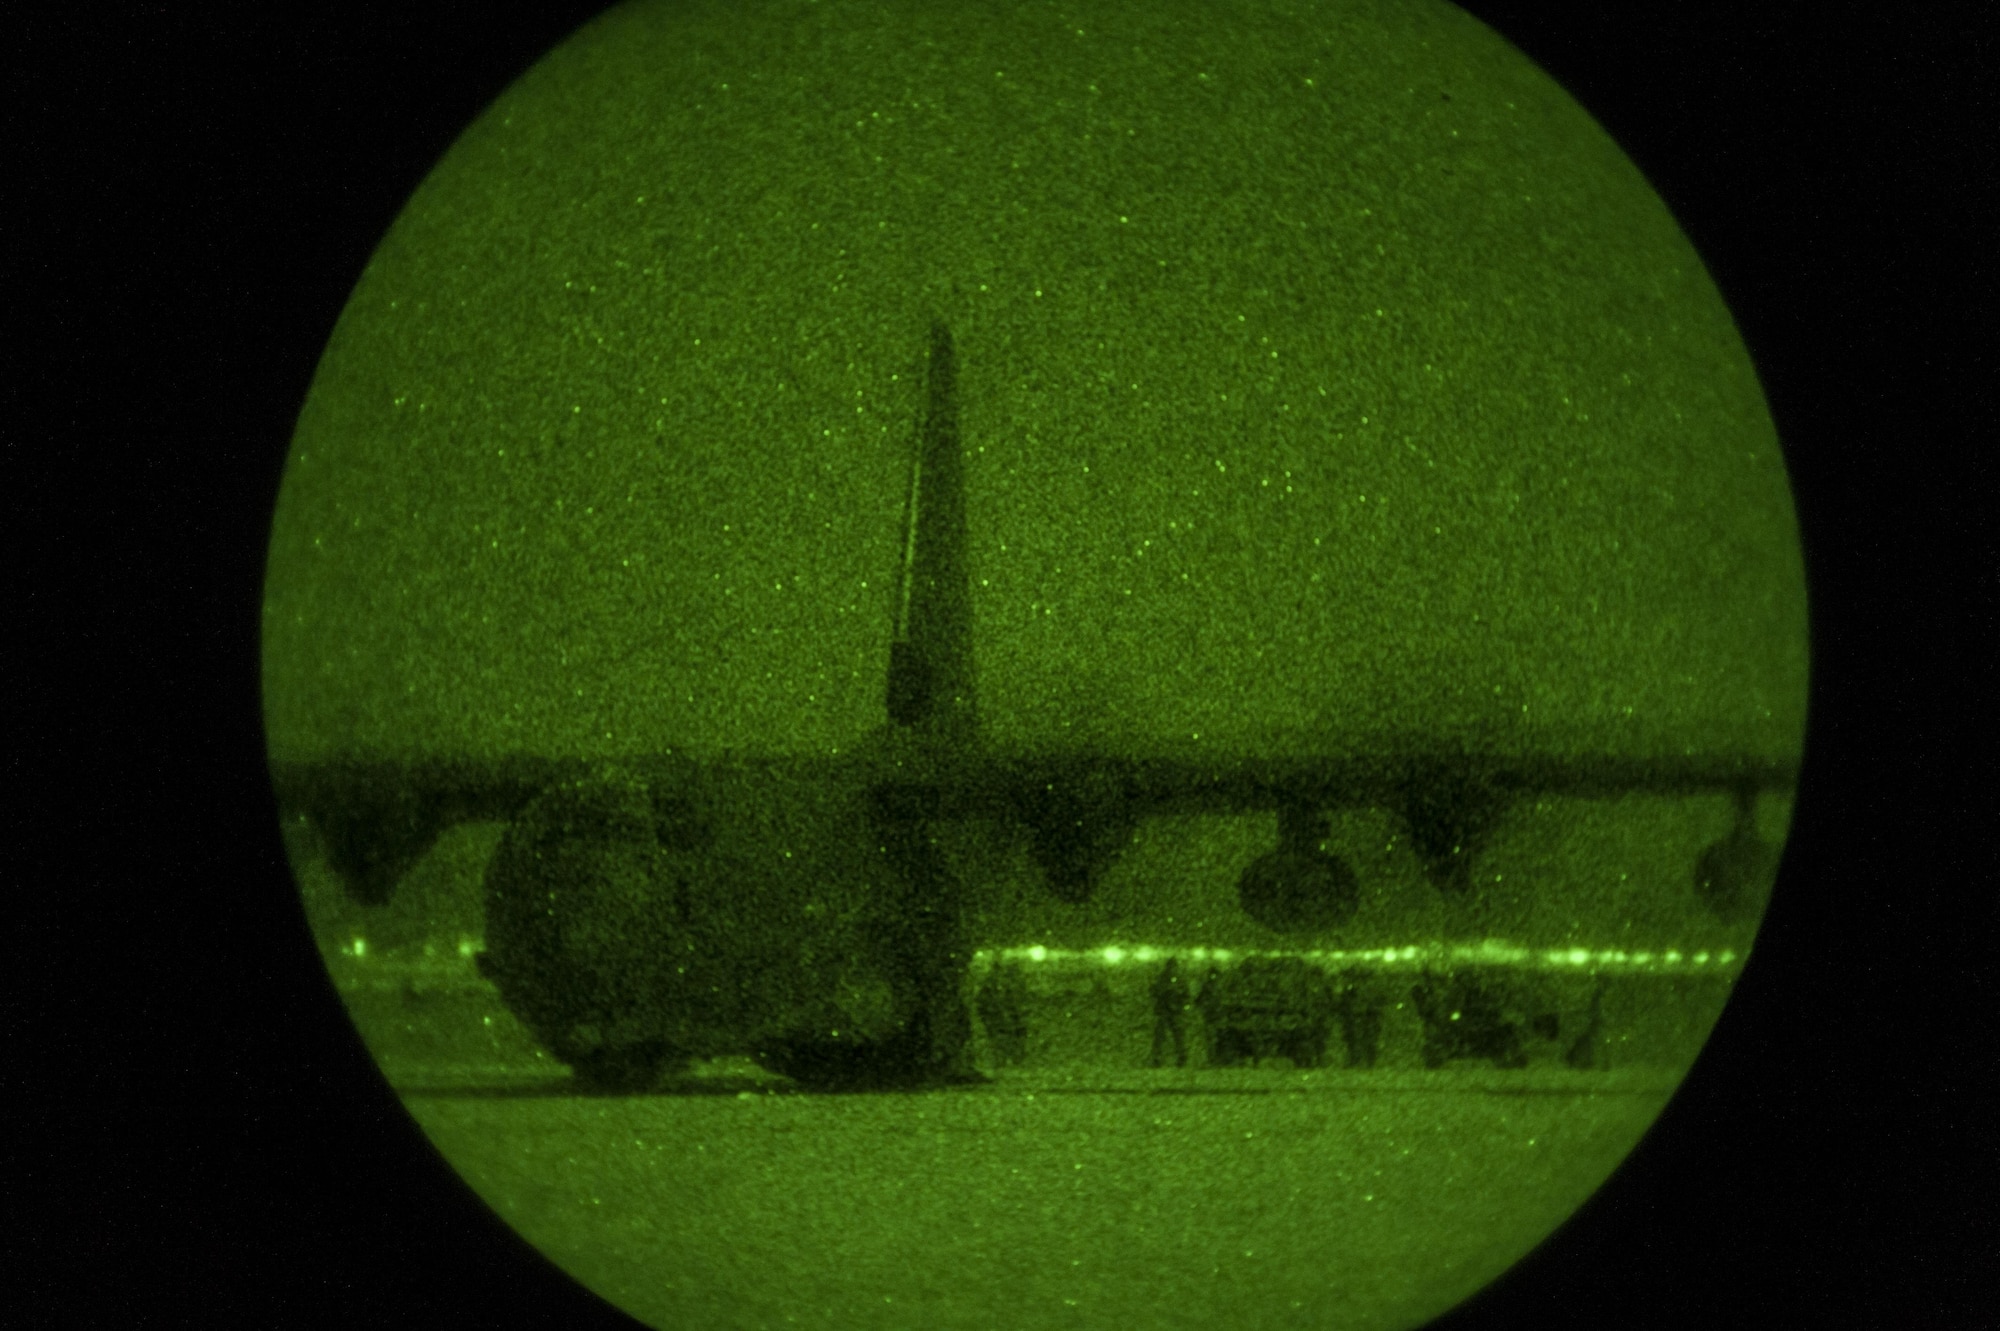 Special Tactics Airmen assigned to the 26th Special Tactics Squadron download equipment from a MC-130J aircraft during a Full Mission Profile exercise at White Sands Missile Range, N.M., Oct. 12, 2016.  The FMP was utilized to integrate special operations forces and foster tactical maturity through deliberate planning and execution of a force projection package and enable Special Tactics Airmen pre-deployment evaluation. (U.S. Air Force photo by Tech. Sgt. Manuel J. Martinez)